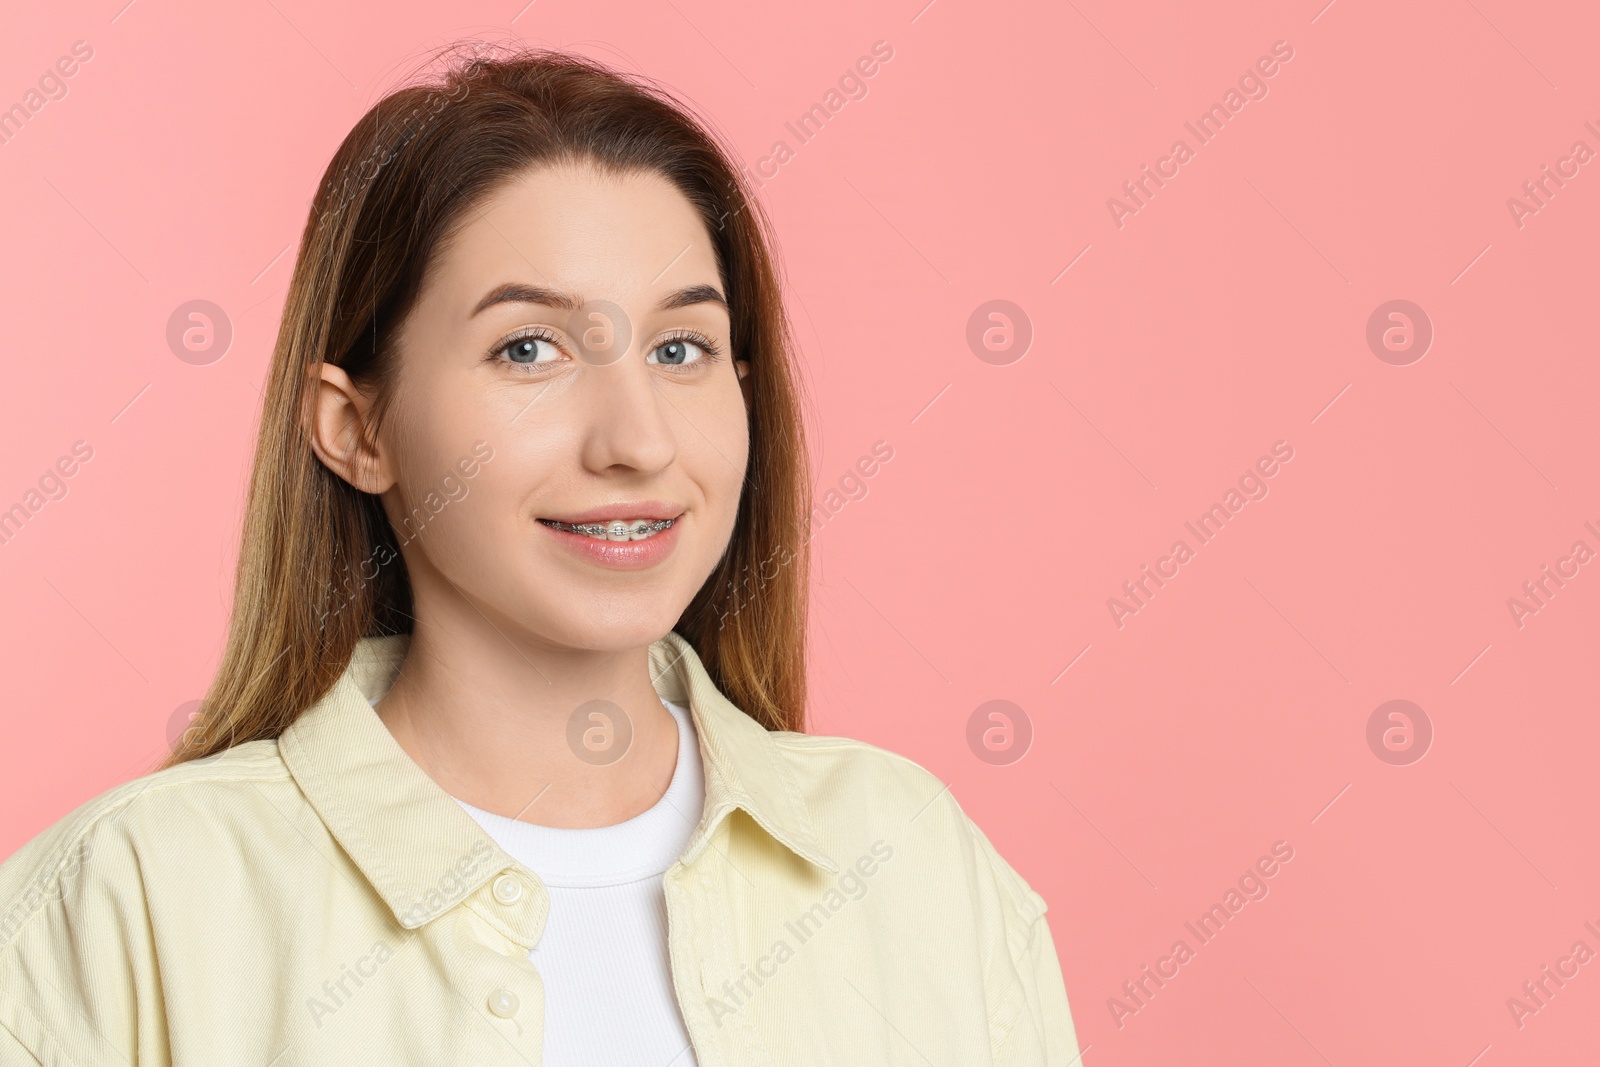 Photo of Portrait of smiling woman with dental braces on pink background. Space for text